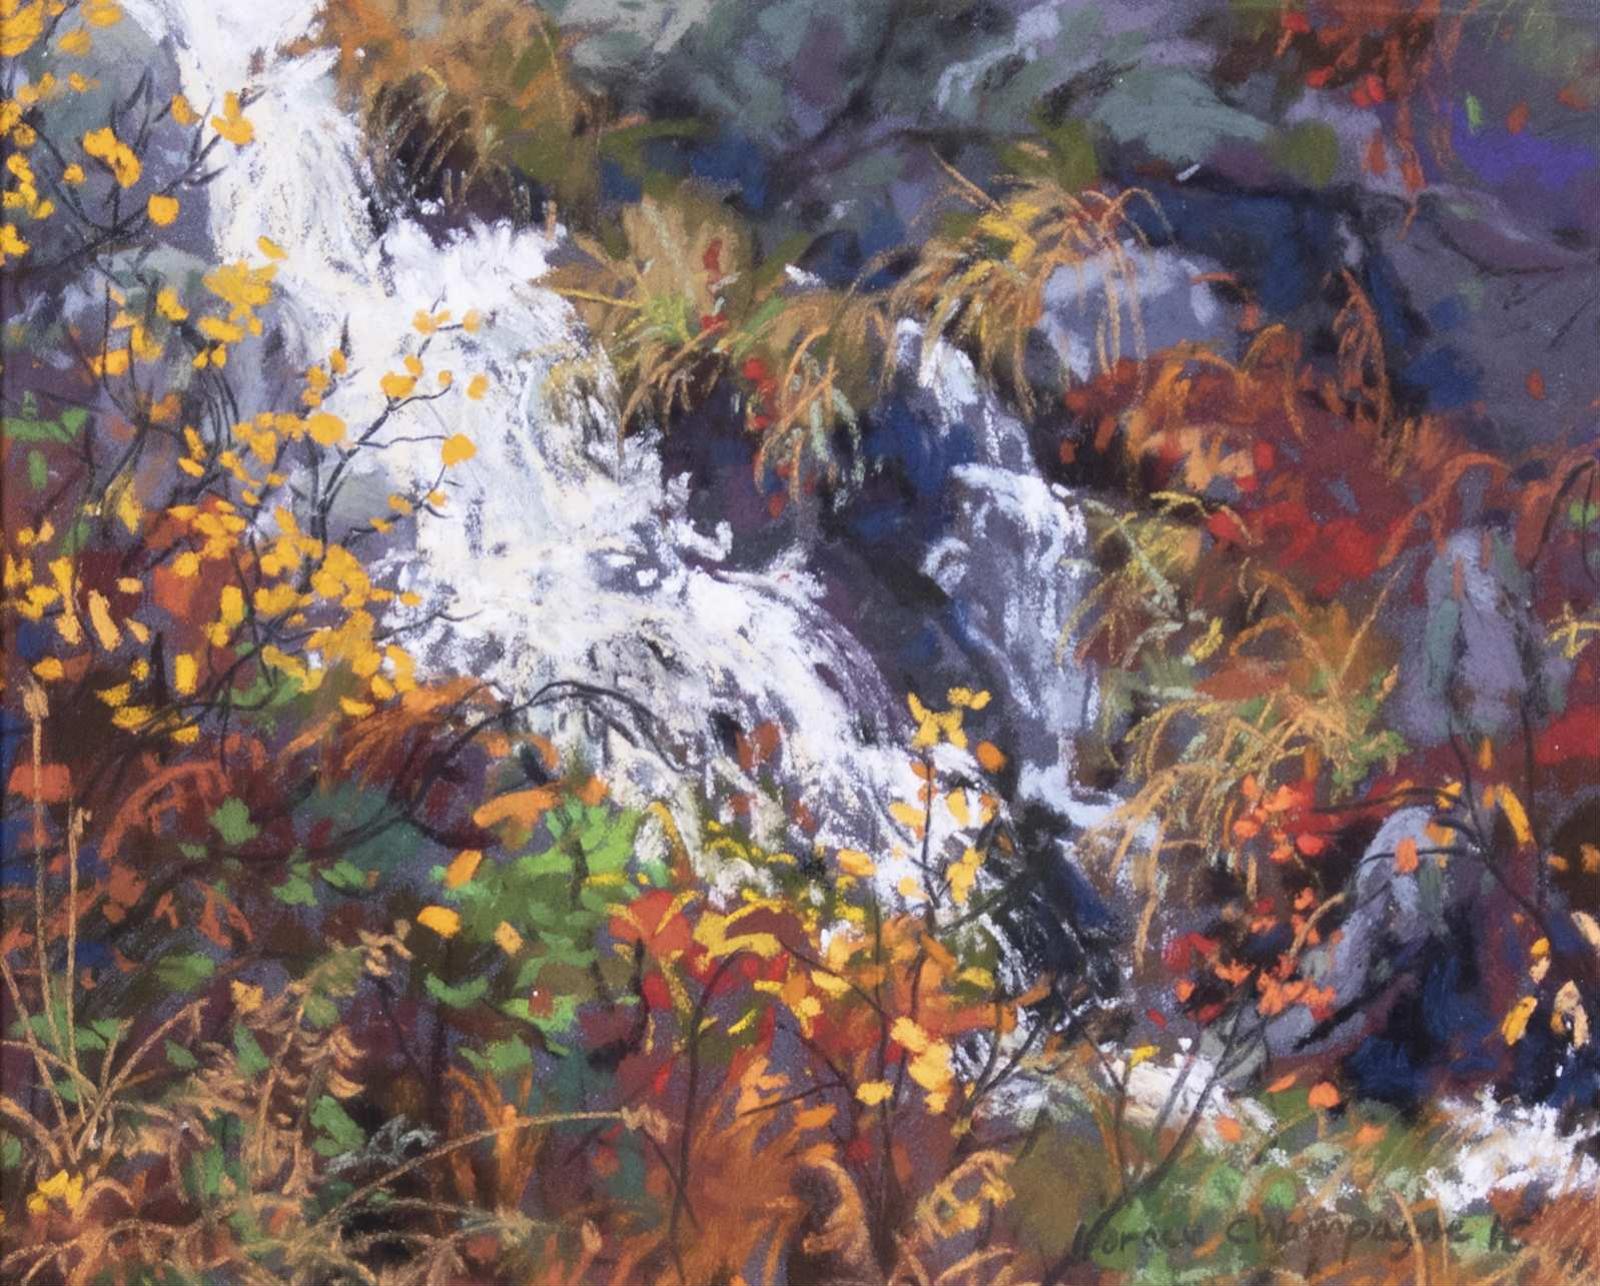 Horace Champagne (1937) - Wild Bouquets And Rushing Stream (Rose Blanche, Newfoundland); 2007